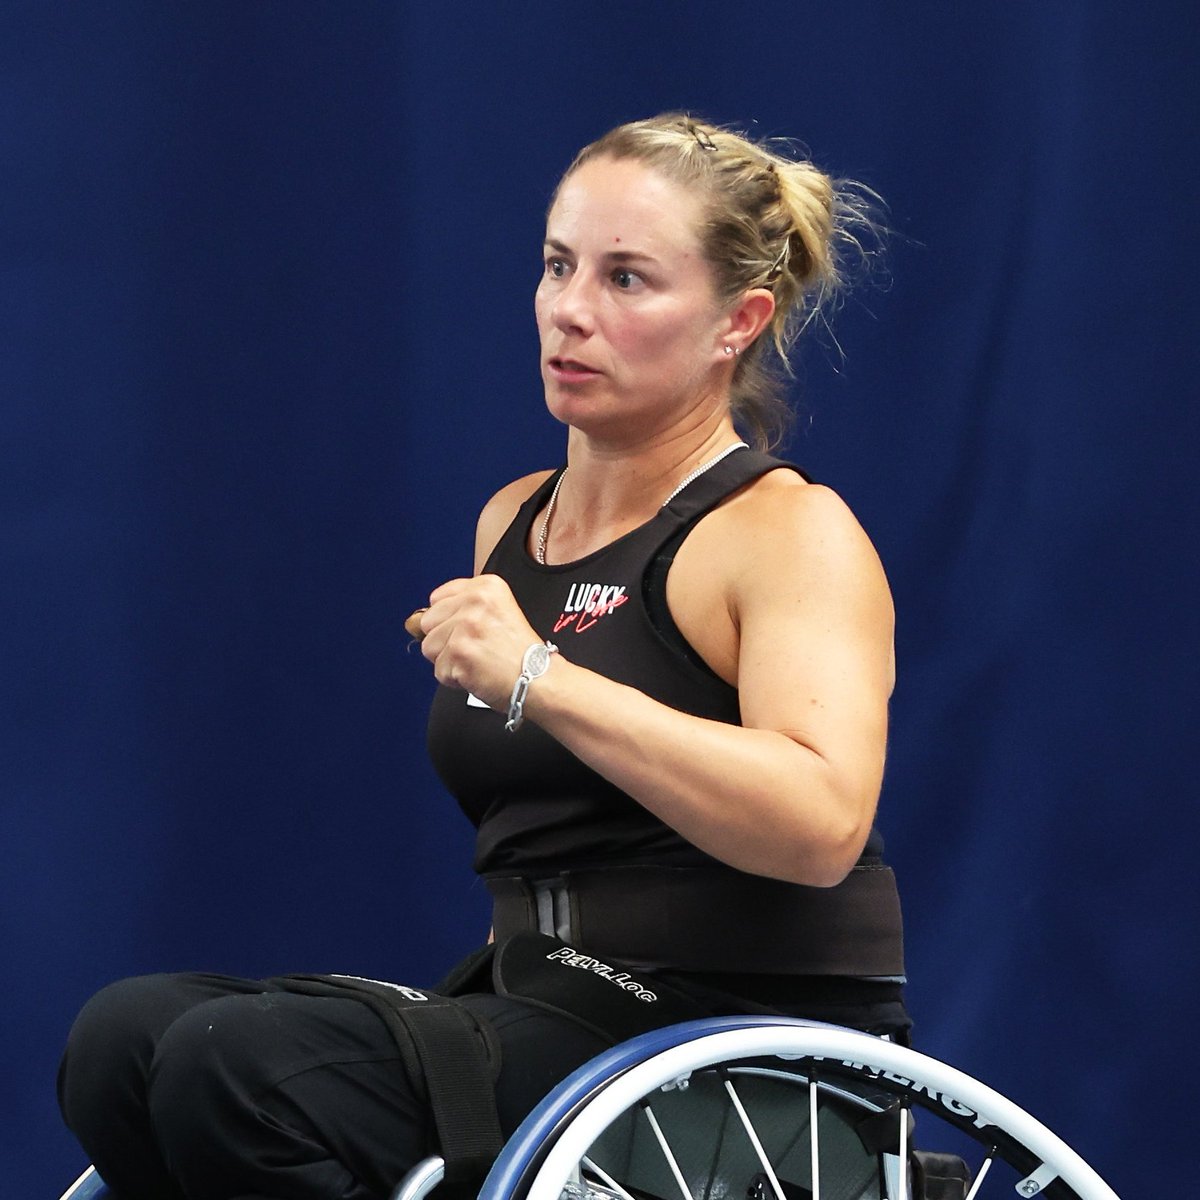 🏆 3rd ITF 1 doubles title this season for @lucy_shuker 🏆 5th career doubles title with Aniek van Koot 🏆 3rd Sardinia Open doubles title since 2005 Top seeds Shuker & Van Koot beat Deroulede & Morch (FRA) 6-3, 6-2 in Alghero. #BackTheBrits 🇬🇧🇳🇱 | #wheelchairtennis